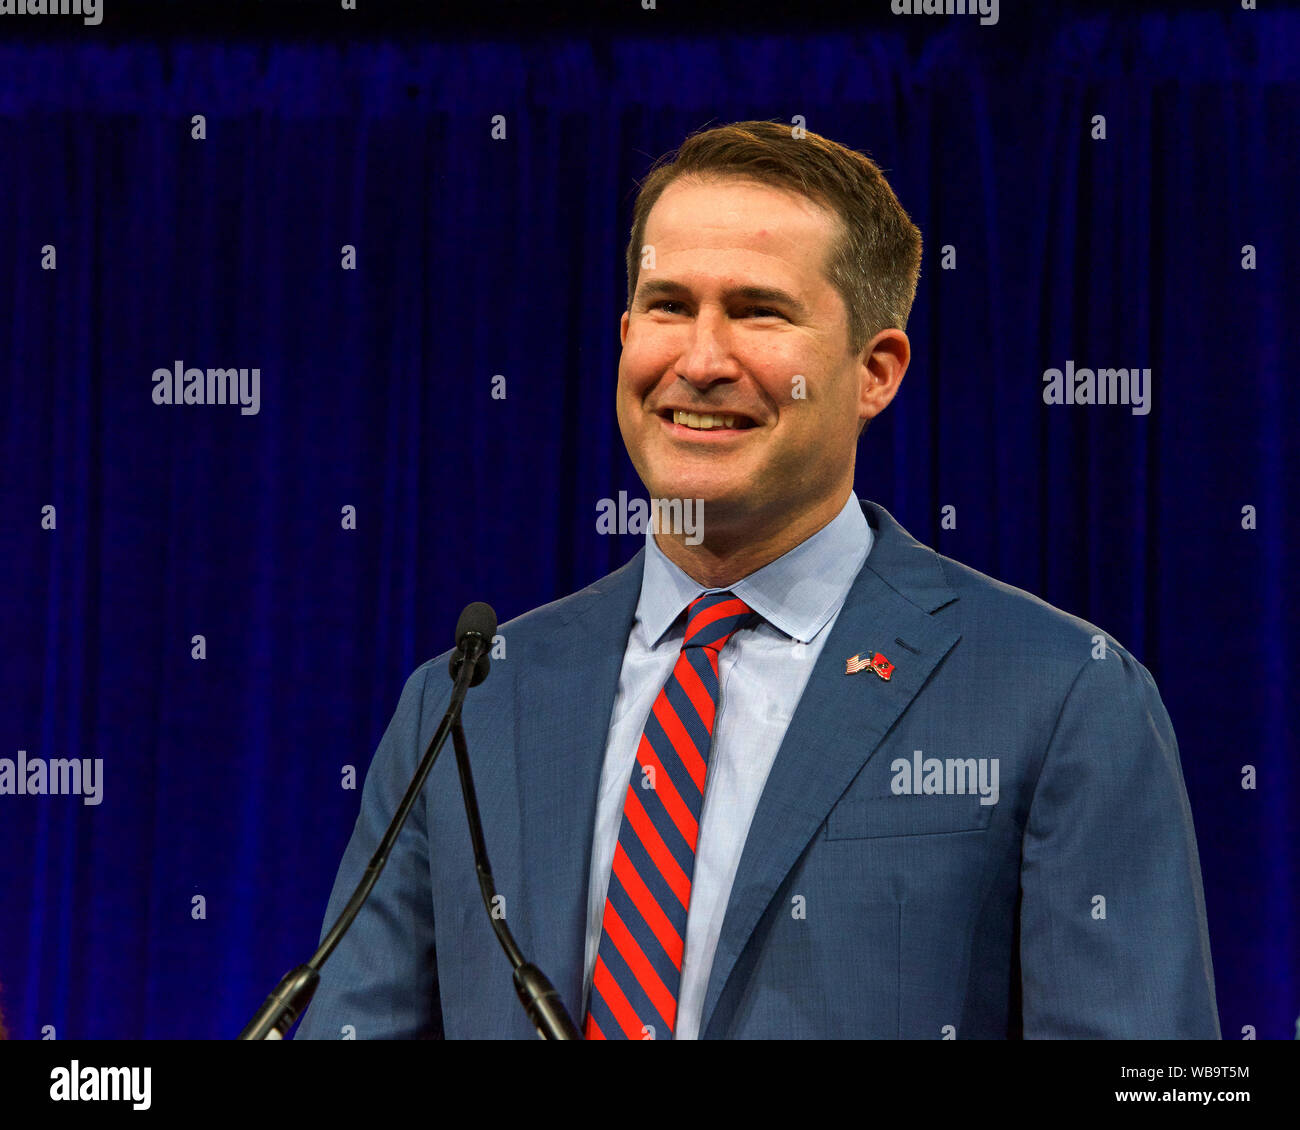 San Francisco, CA - August 23, 2019: Presidential candidate Seth Moulton speaking at the Democratic National Convention summer session, announcing his Stock Photo